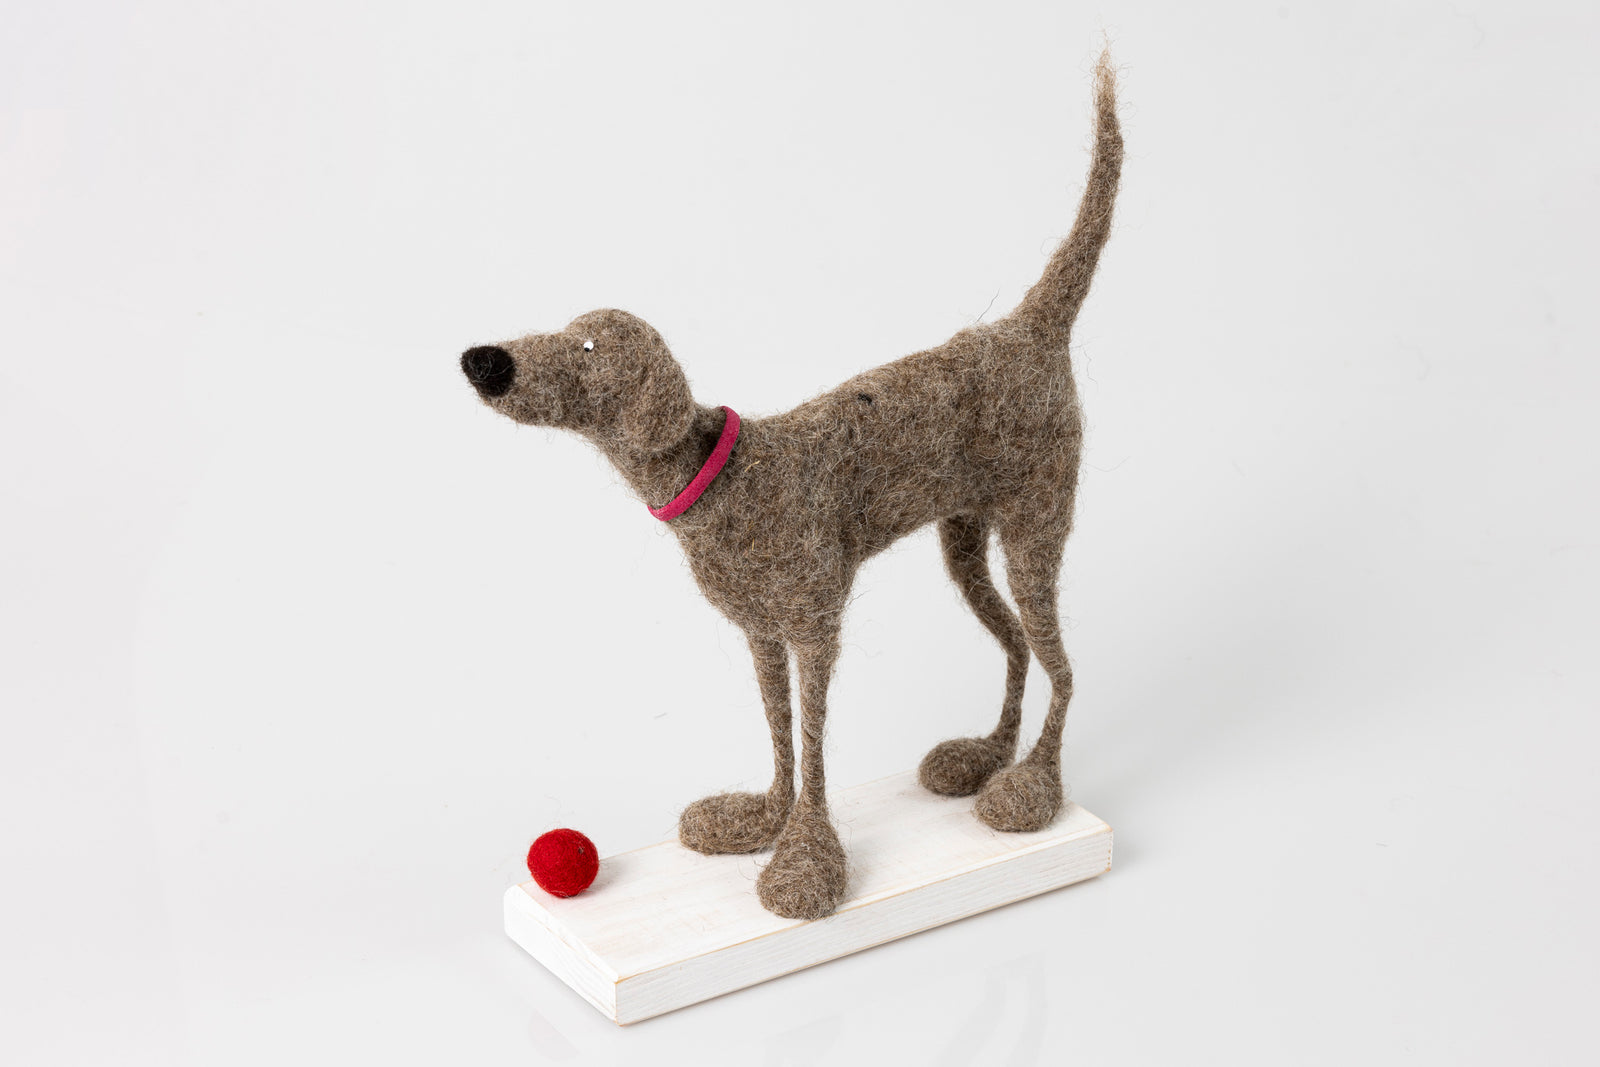 'Good Boy' needlefelt character dog by Kate Toms, available at Padstow Gallery, Cornwall